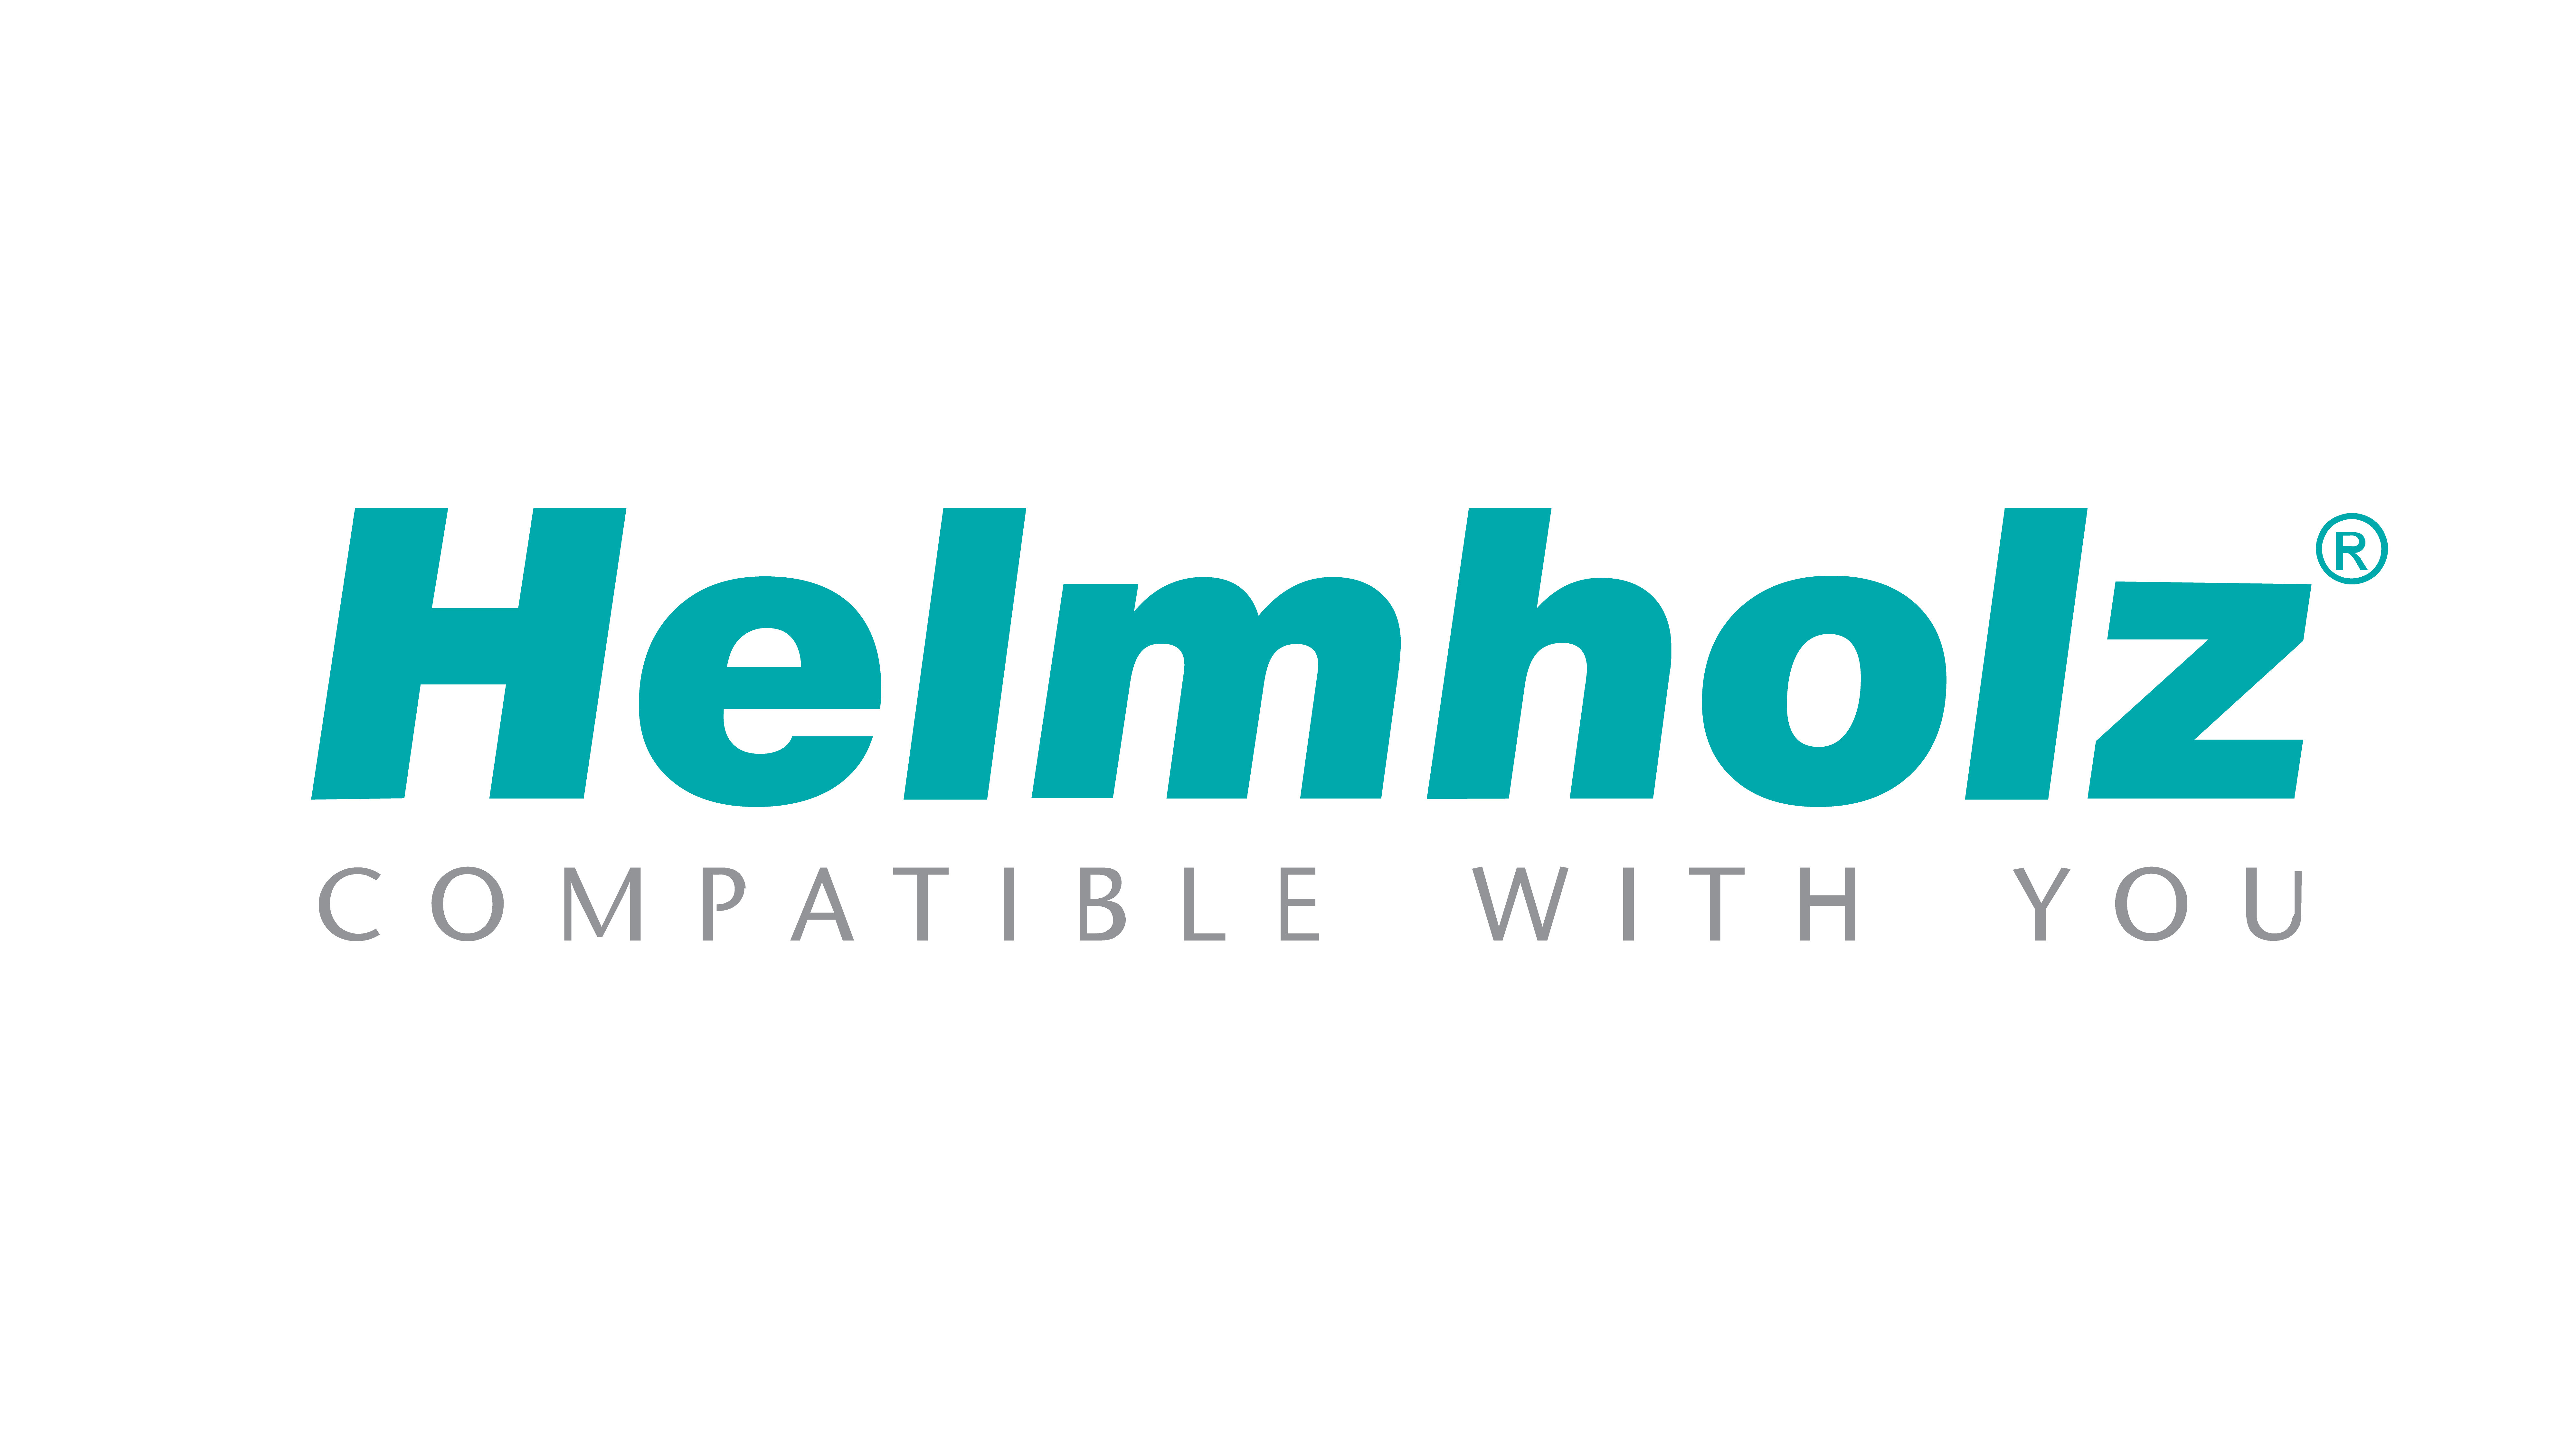 The Logo of Helmholz Benelux in large turquoise letters. "Compatible with you" is written under it in grey letters.